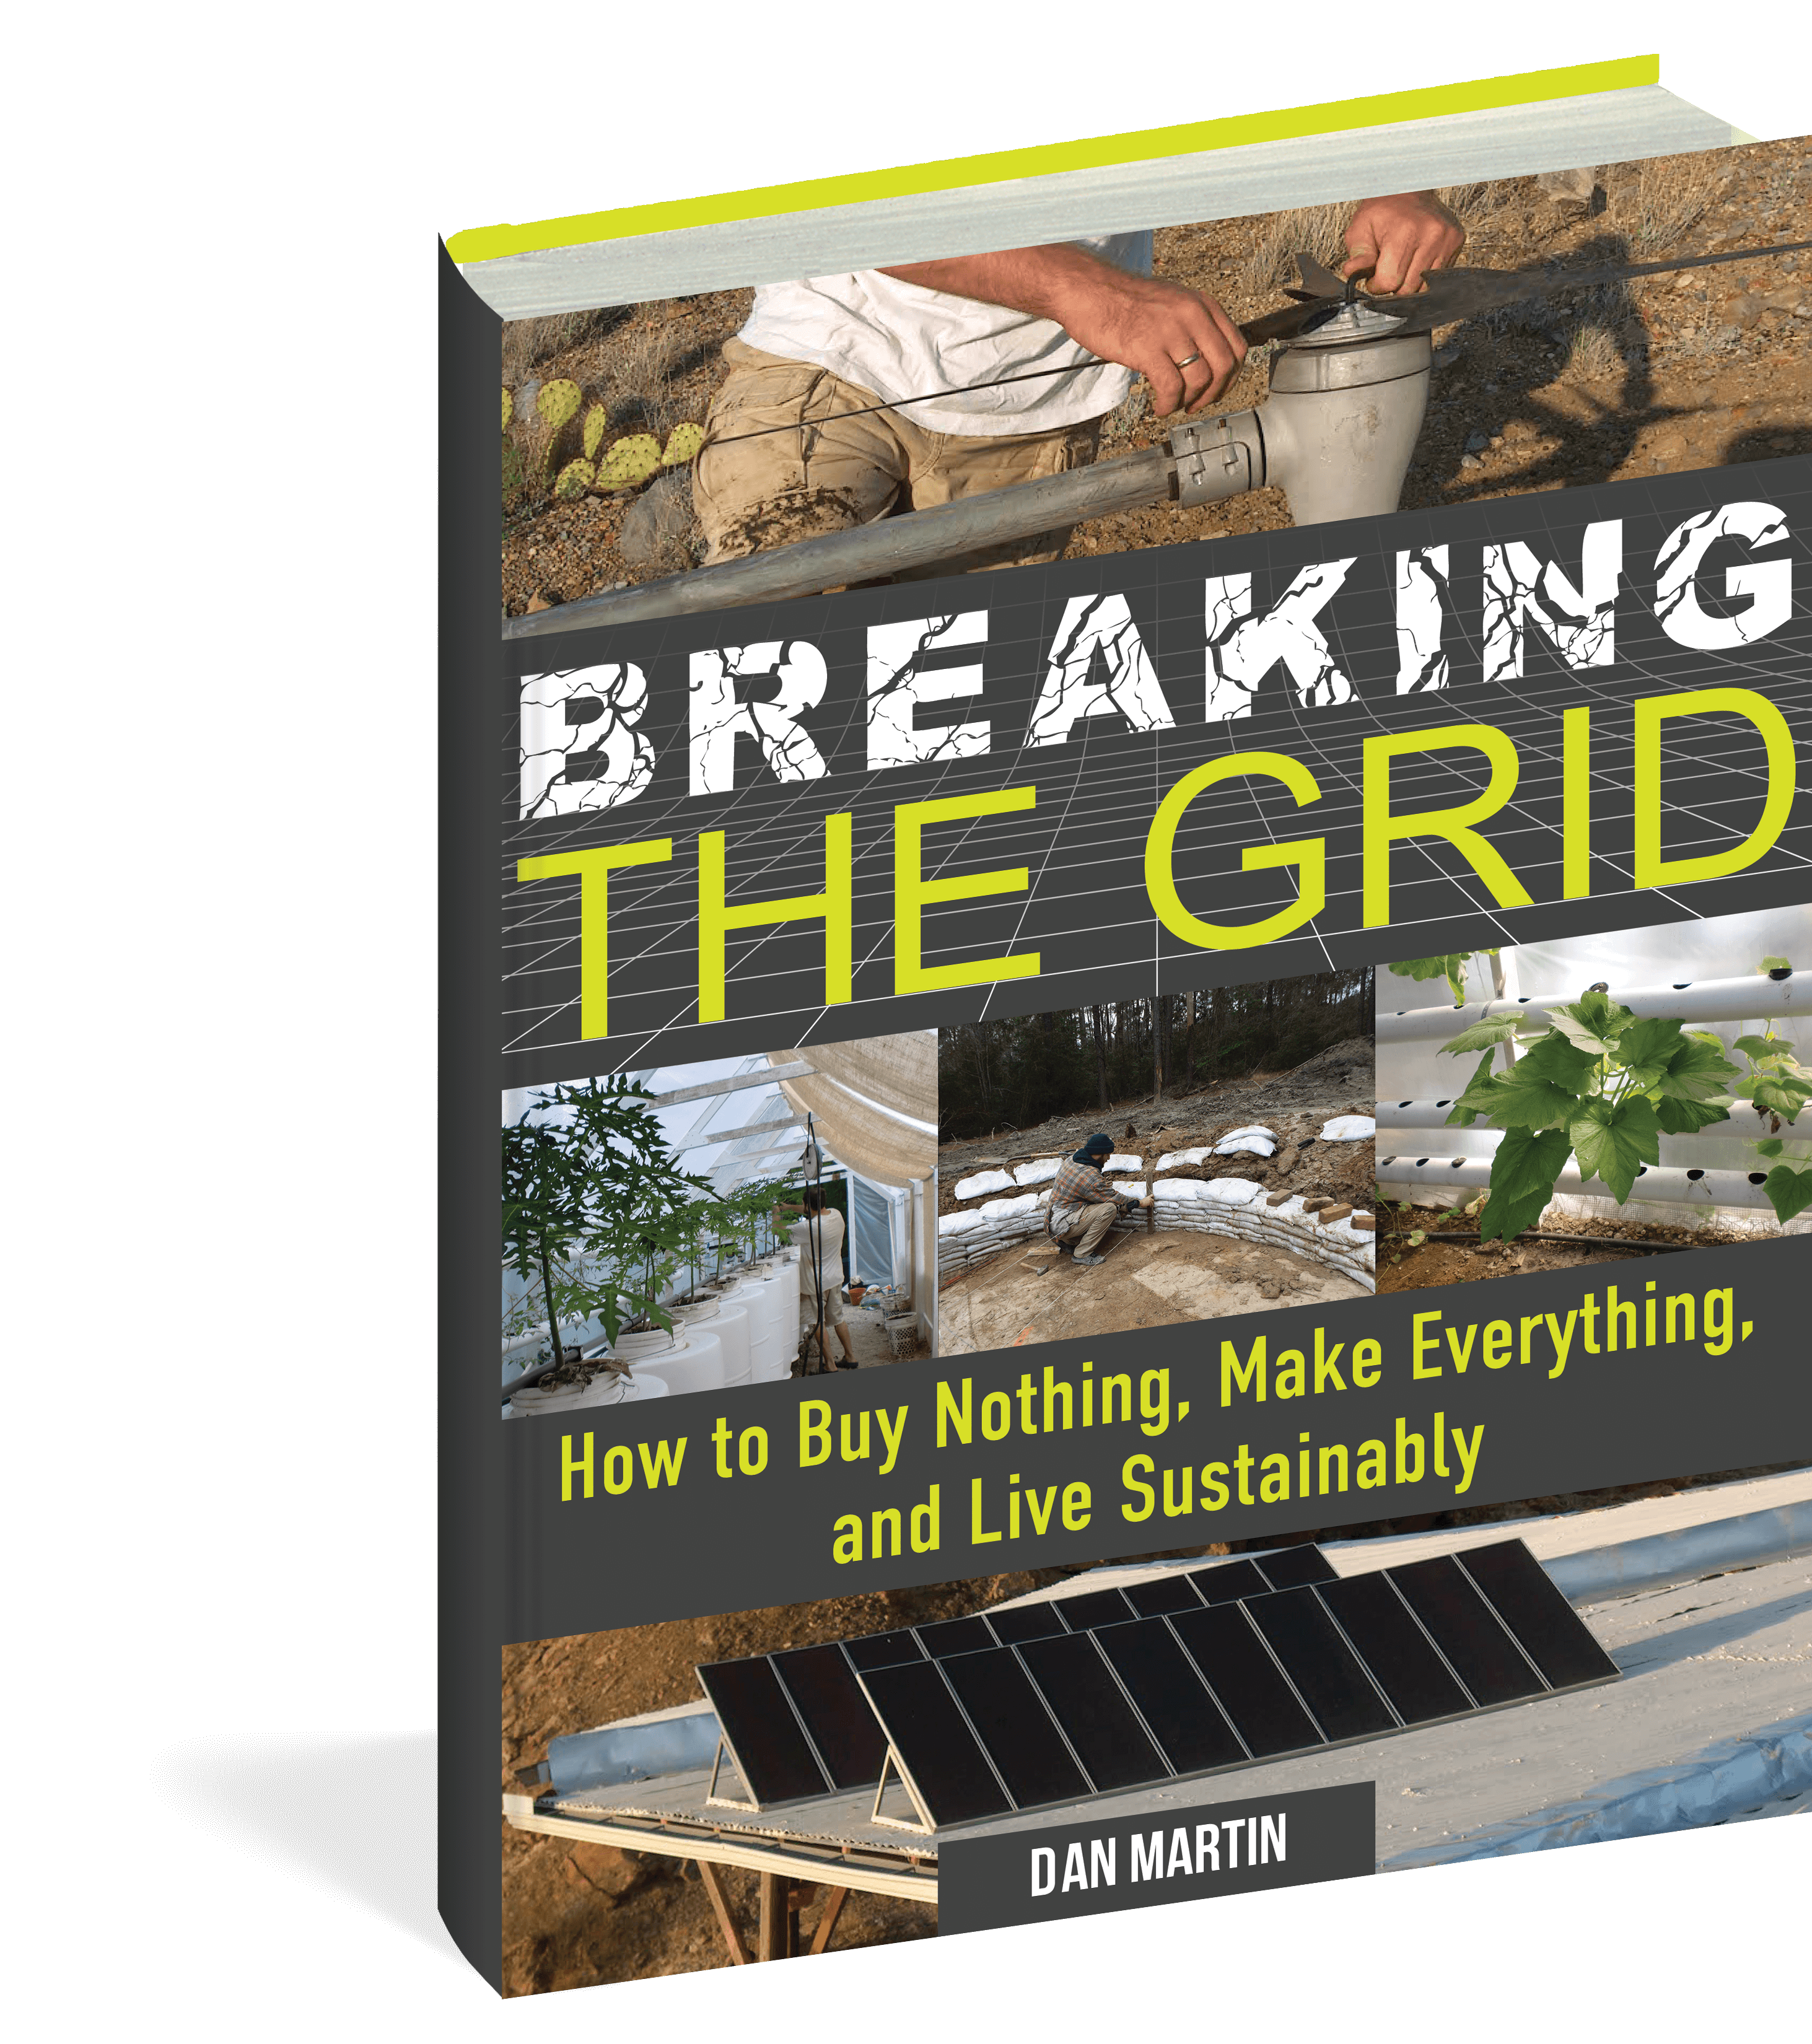 The cover of the book Breaking the Grid.